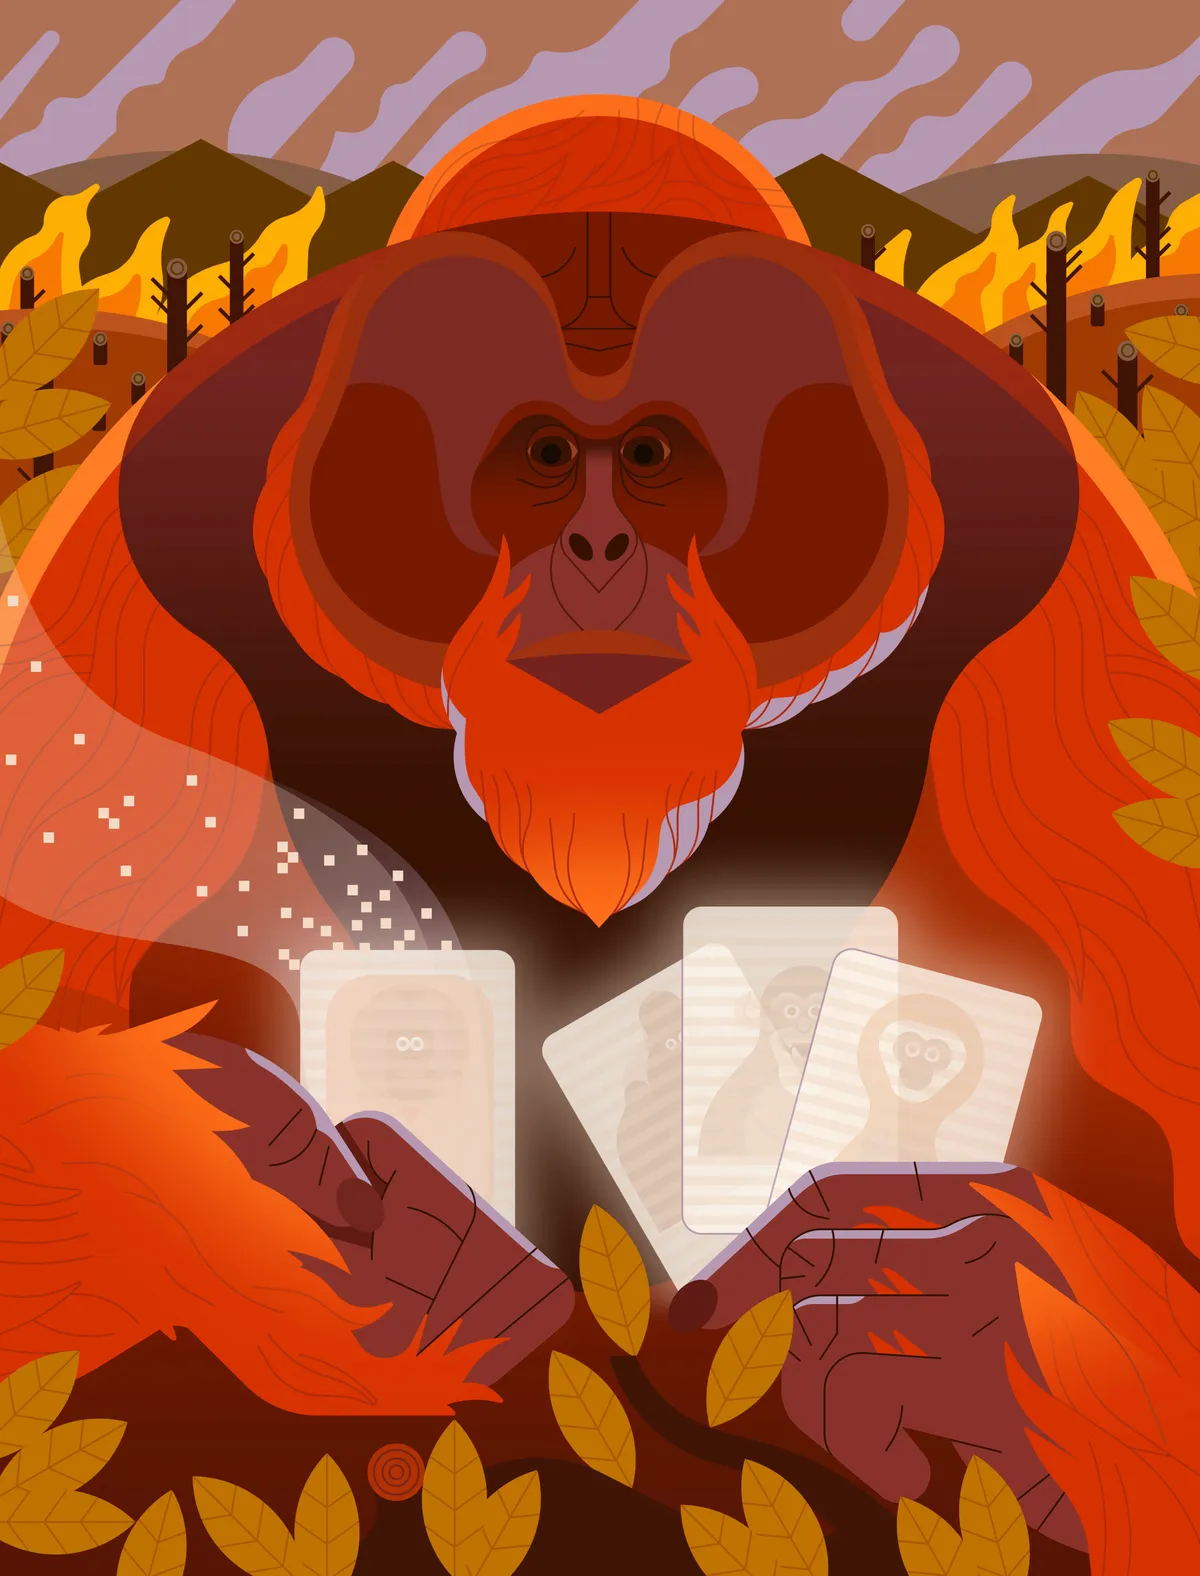 An illustration of an orangutan holding digital files, whilst a forest burns in the background.